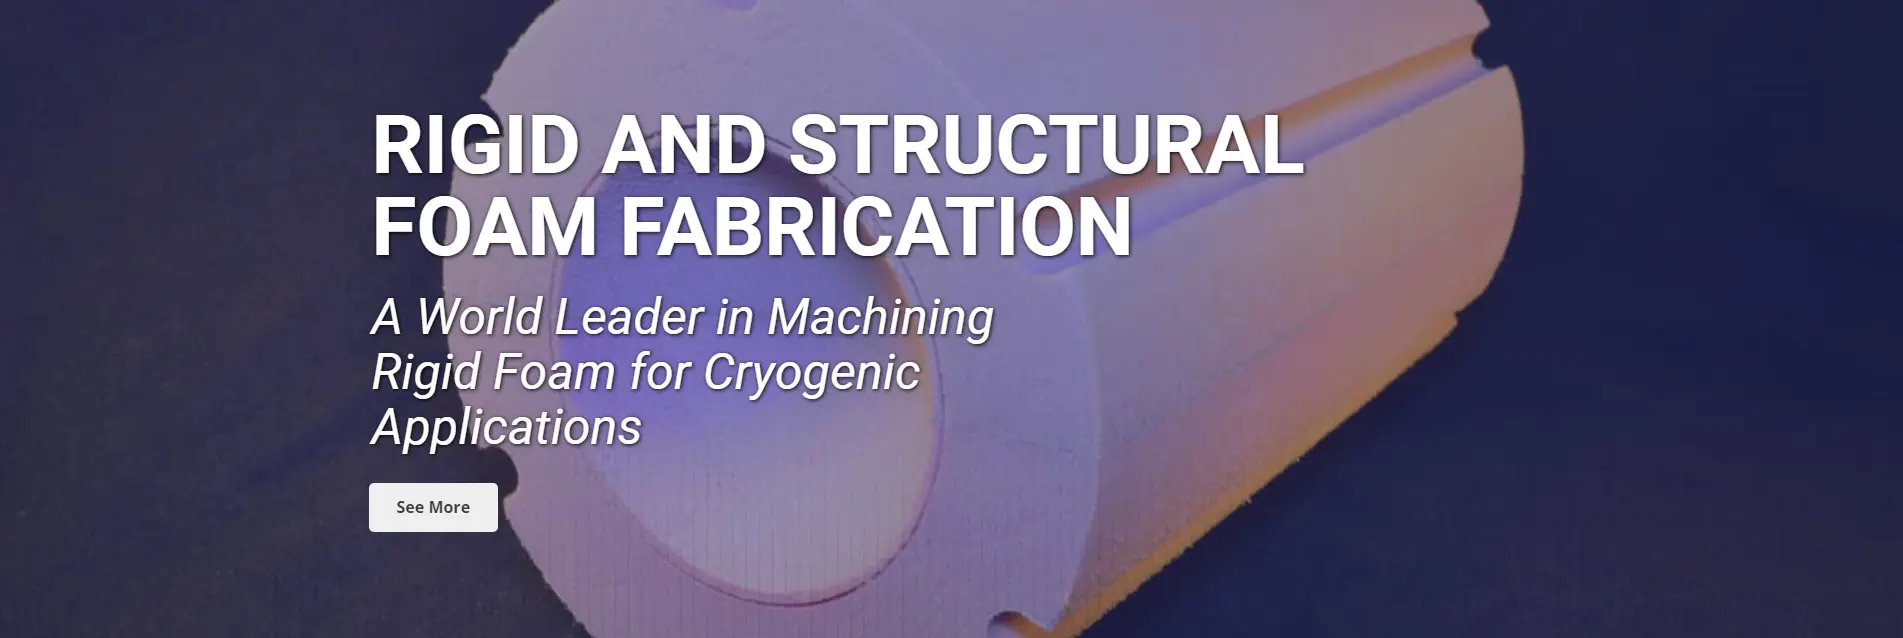 Rigid and Structural foam fabrication